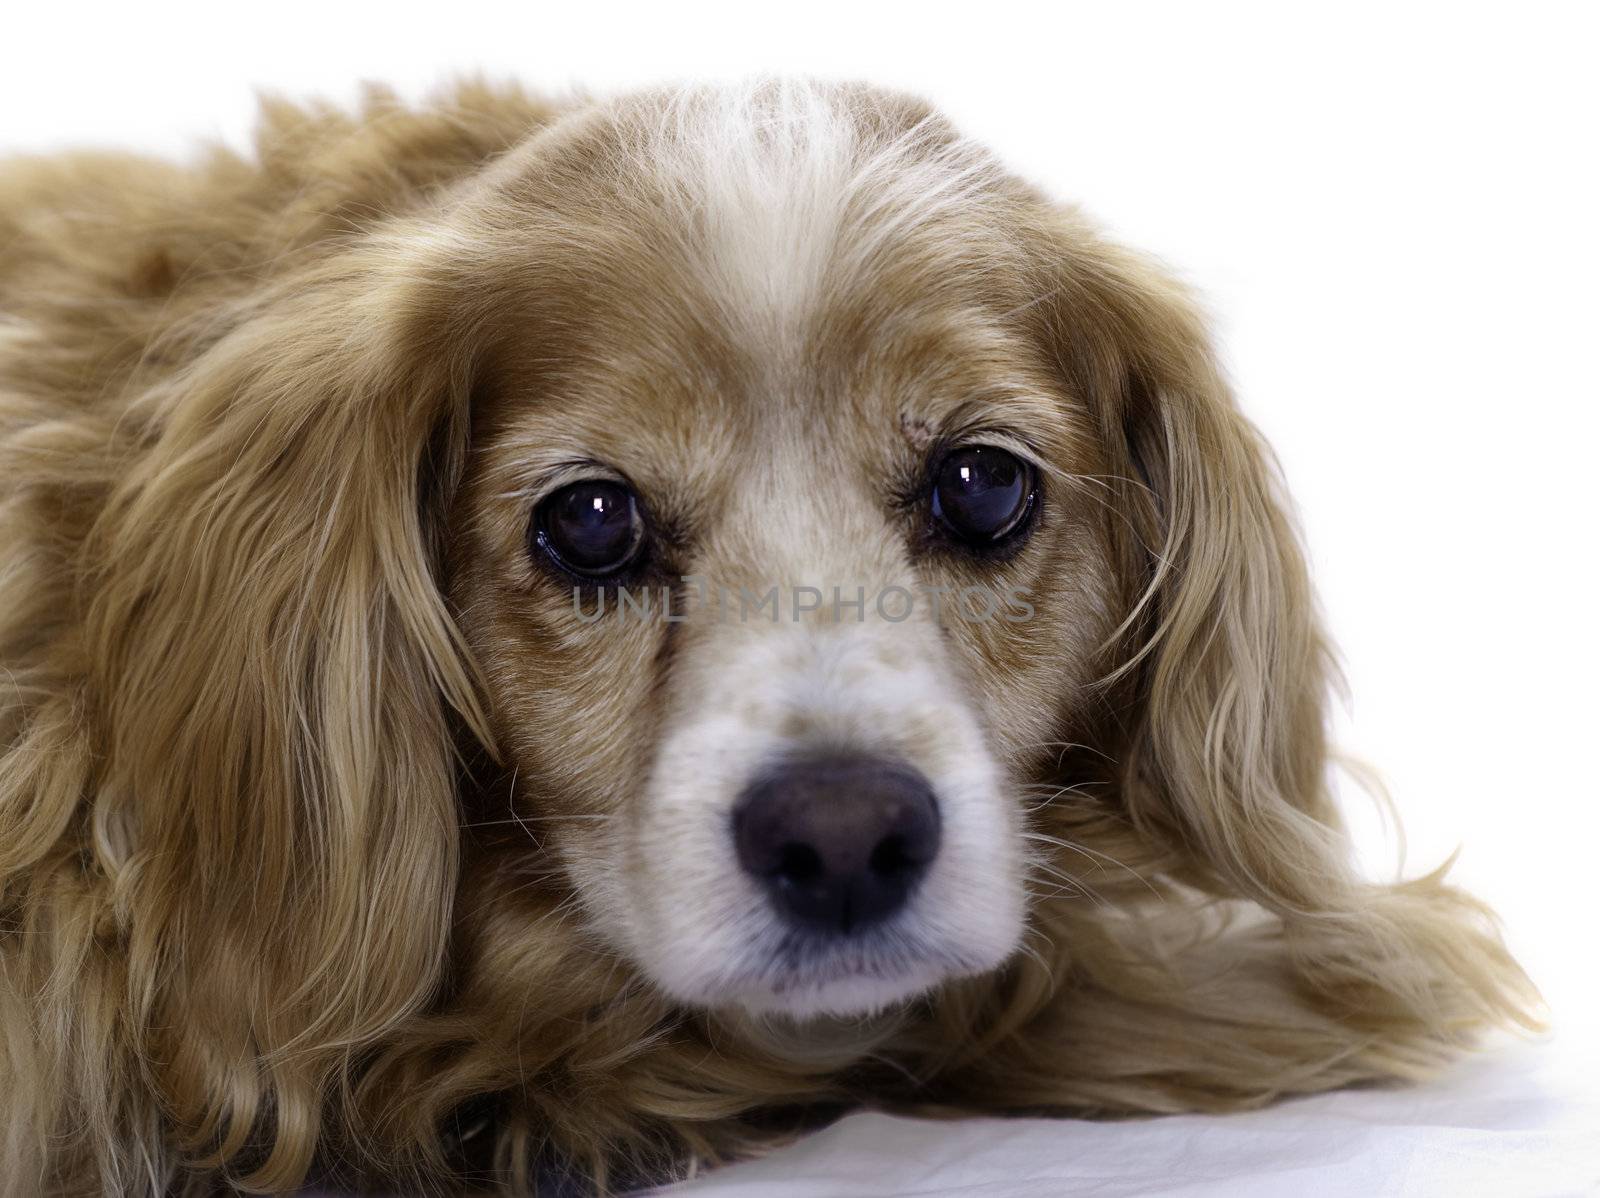 An elderly cockapoo dog is isolated against a white background.